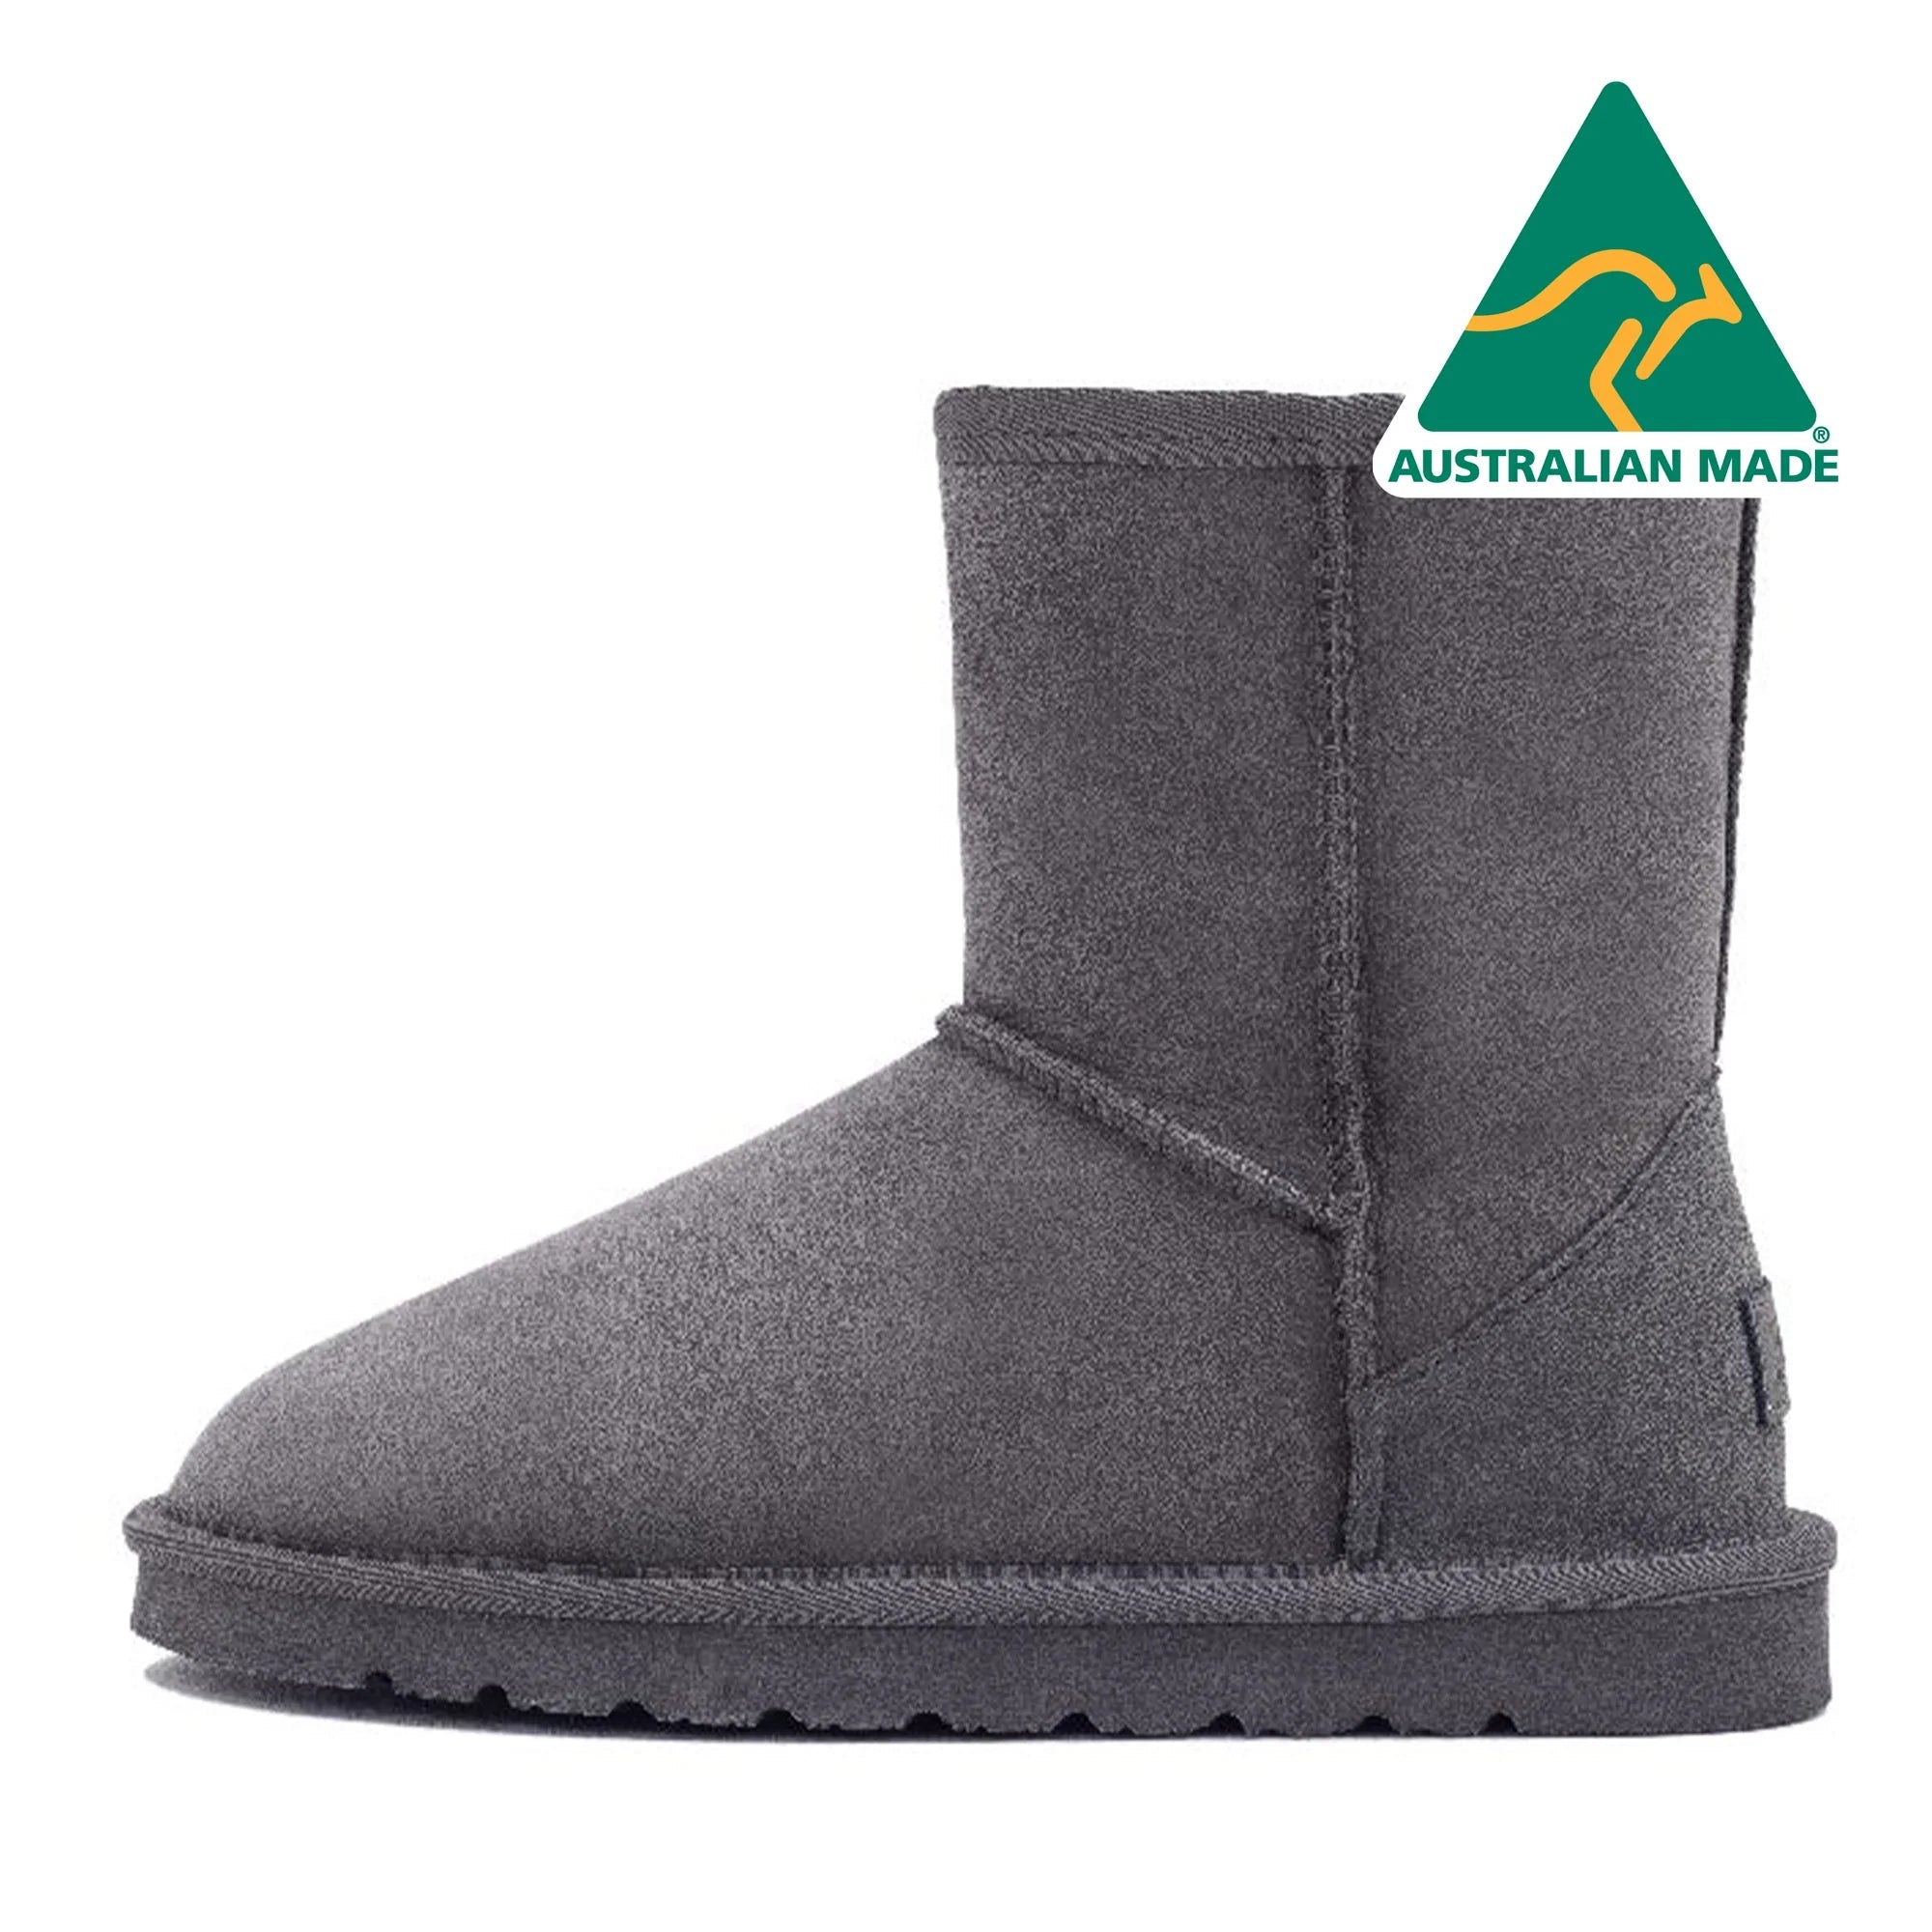 Classic Short UGG Boots - Made in Australia